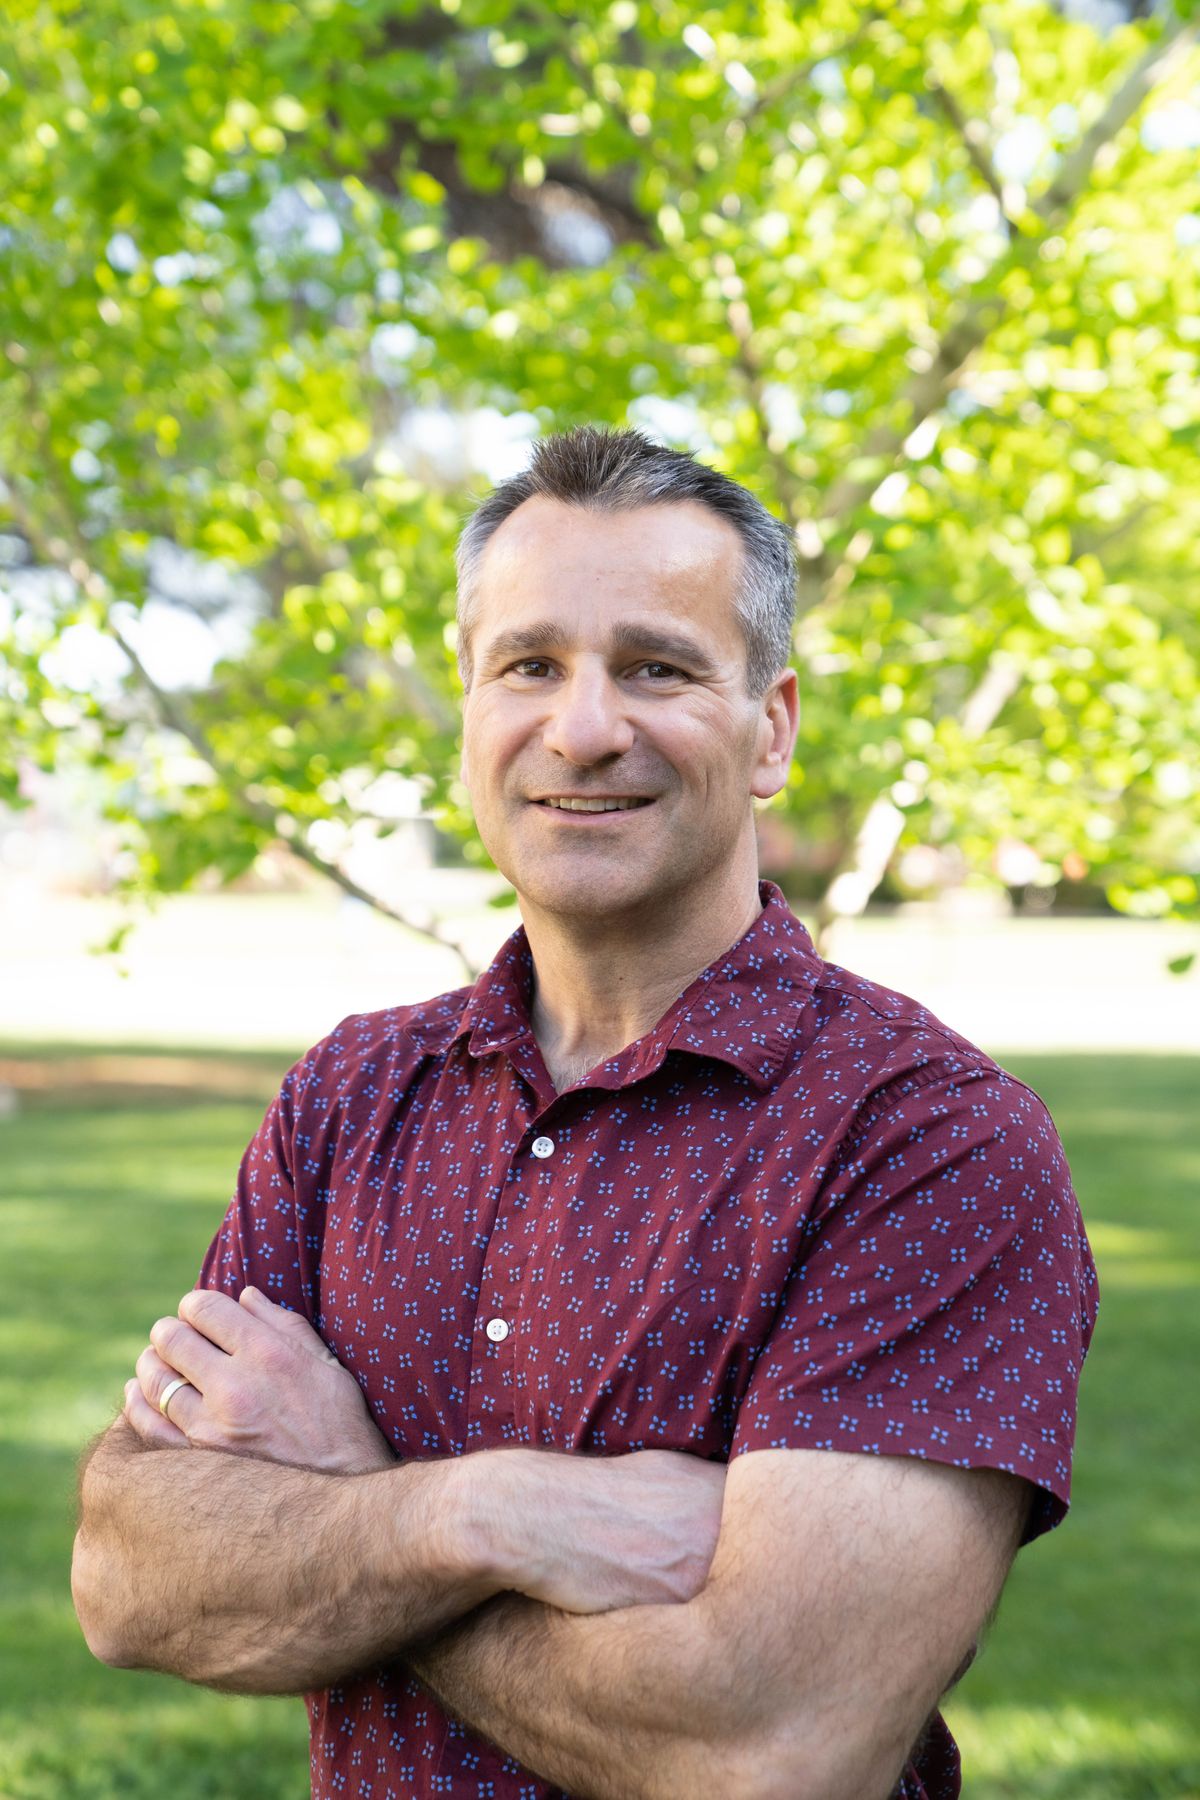 Keith Baar is wearing a patterned shirt. He is standing in front of a tree with his arms crossed.